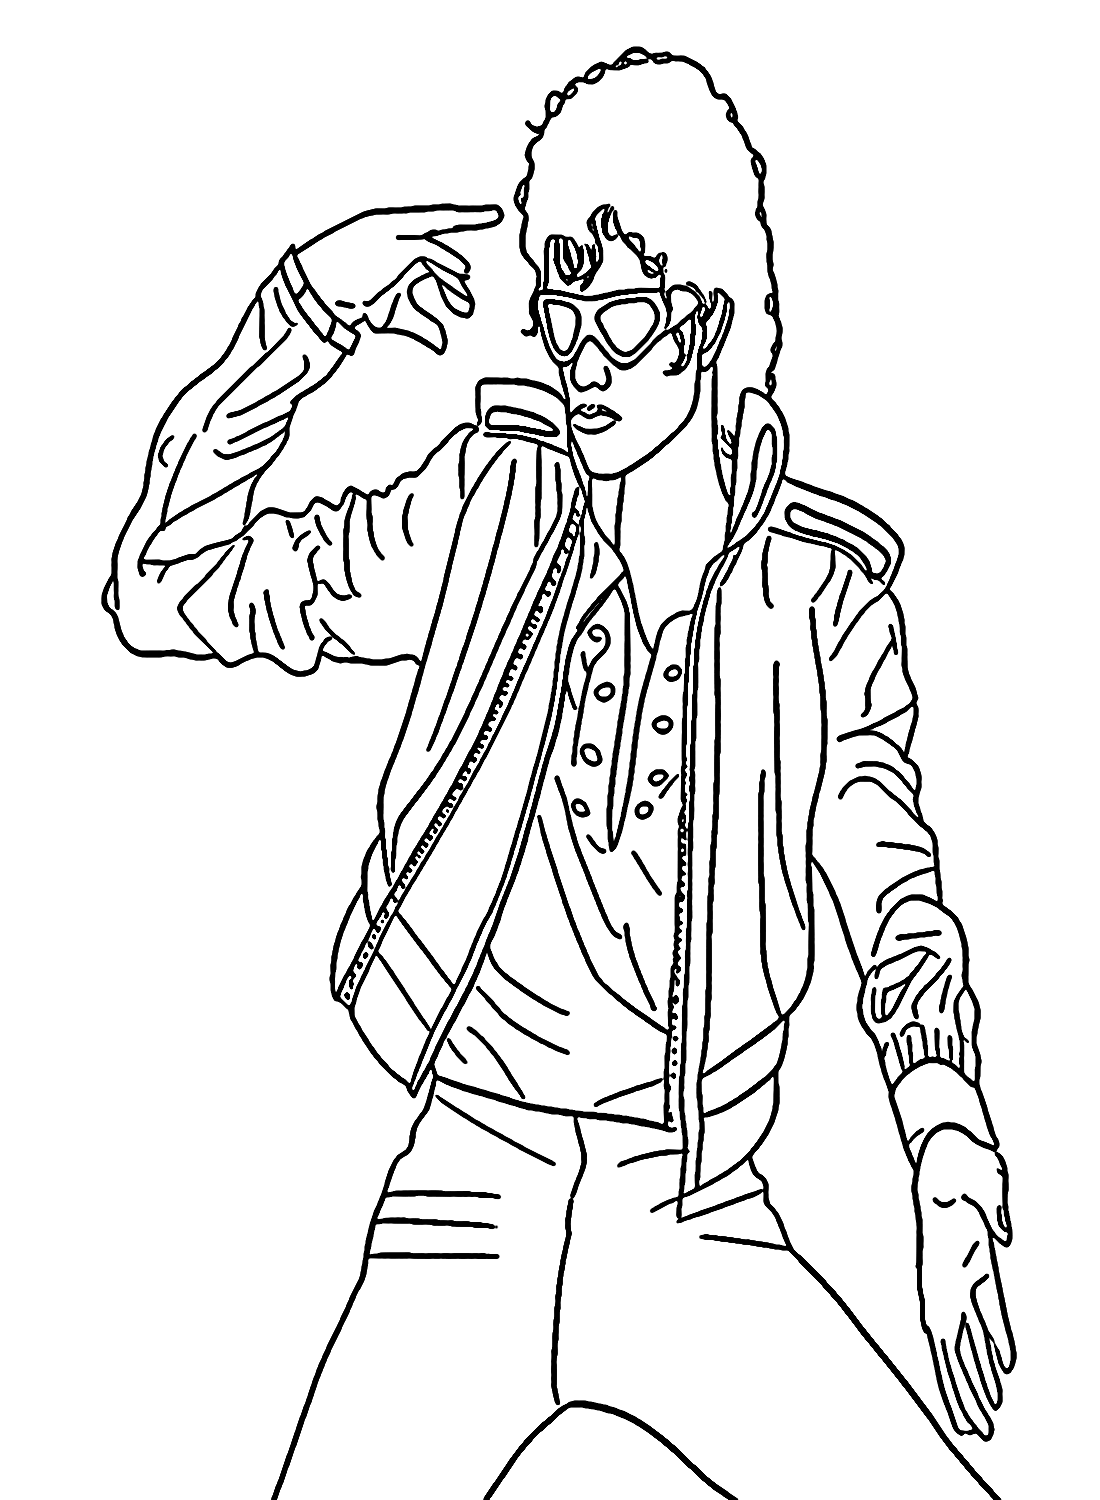 Michael Jackson with Red Leather Jacket Coloring Page